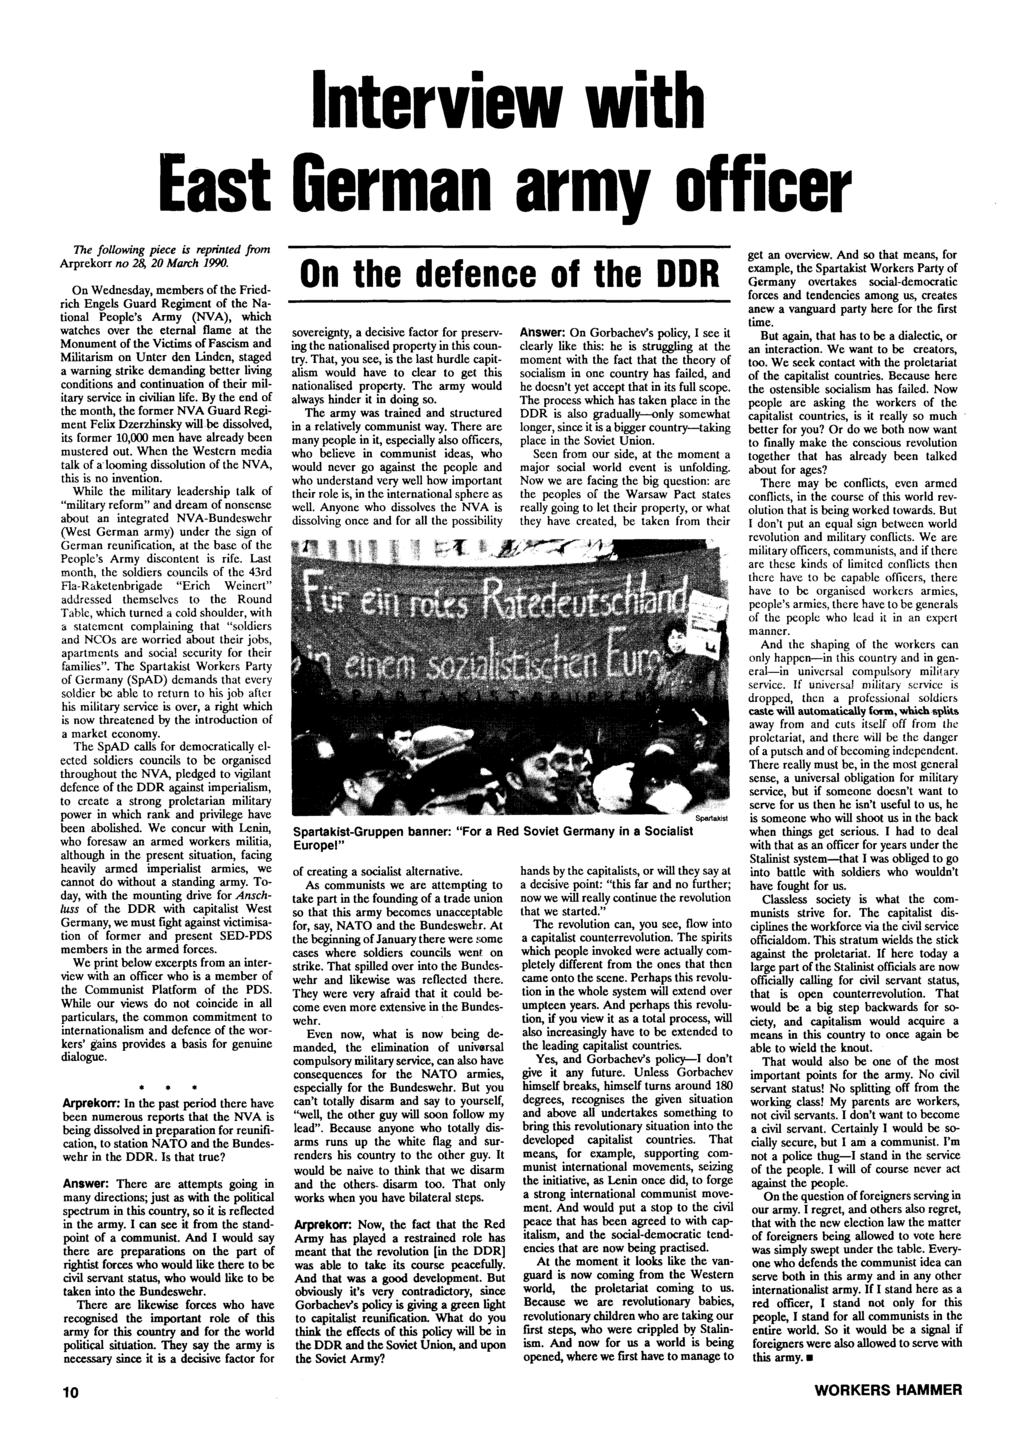 Interview with East German army officer The following piece is reprinted from Arprekorr no 28, 20 March 1990.